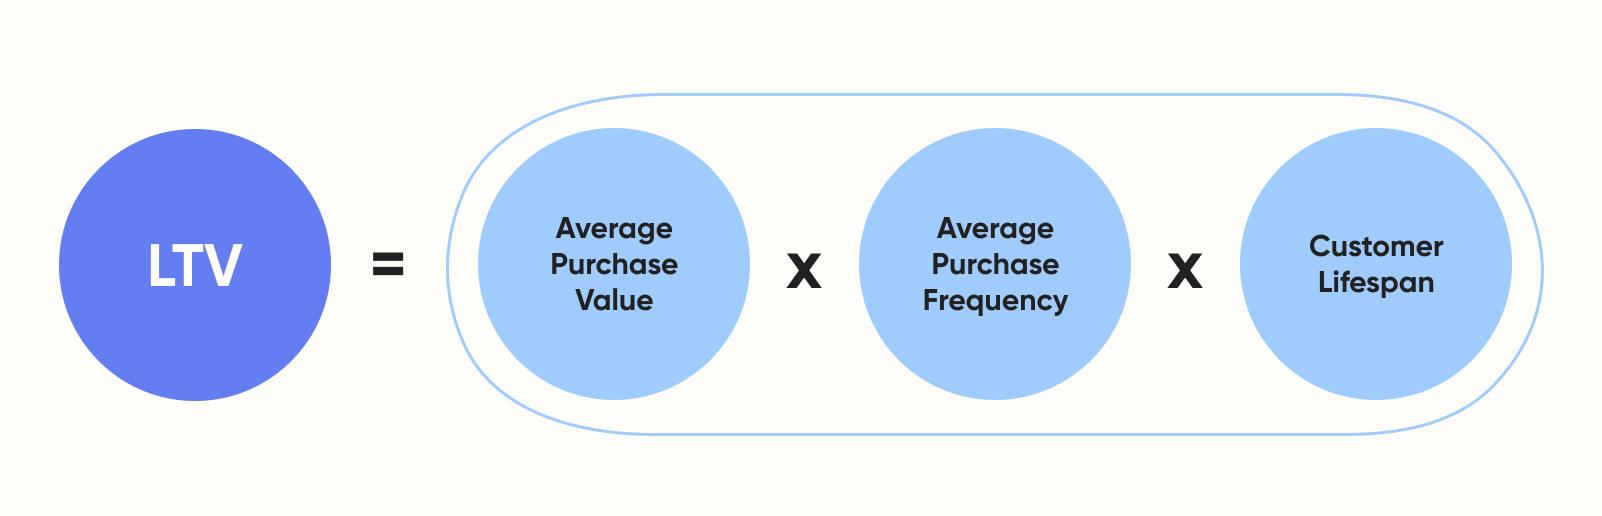 A diagram illustrating the relationship between three customer metrics used in calculatin “Customer Lifetime Value (CLTV)